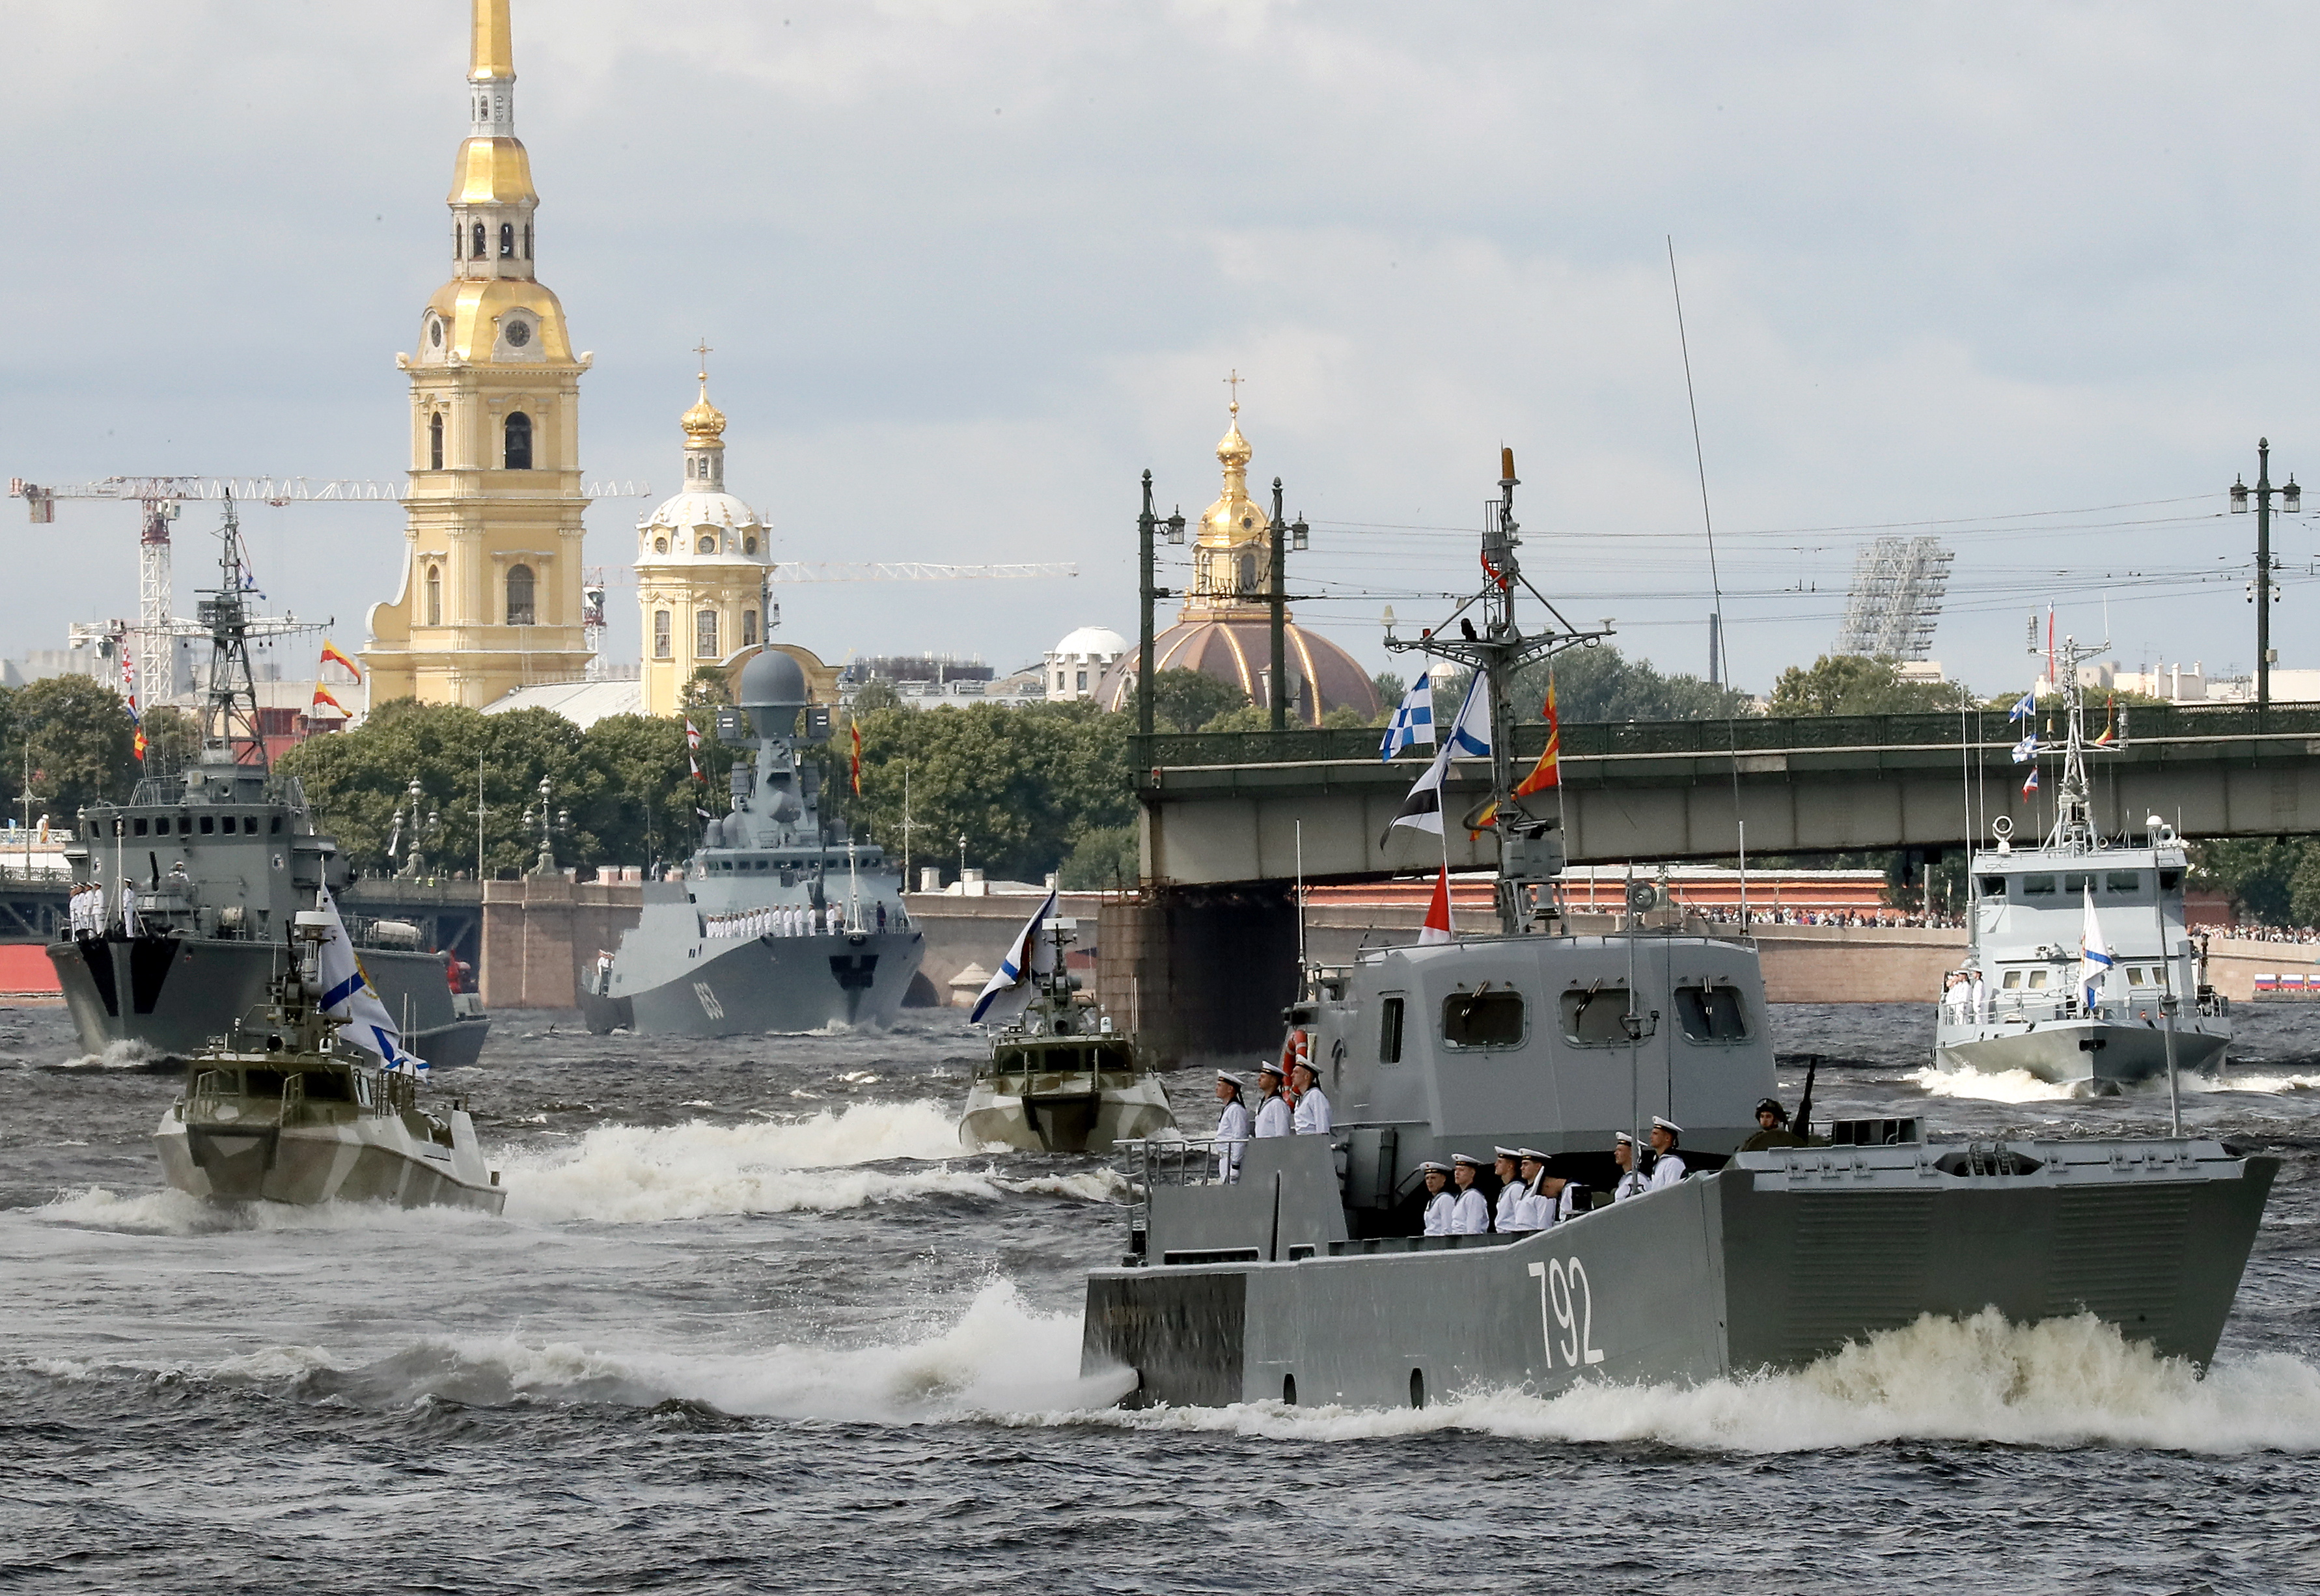 Crowds gathered to watch the spectacle at sea in St Petersburg